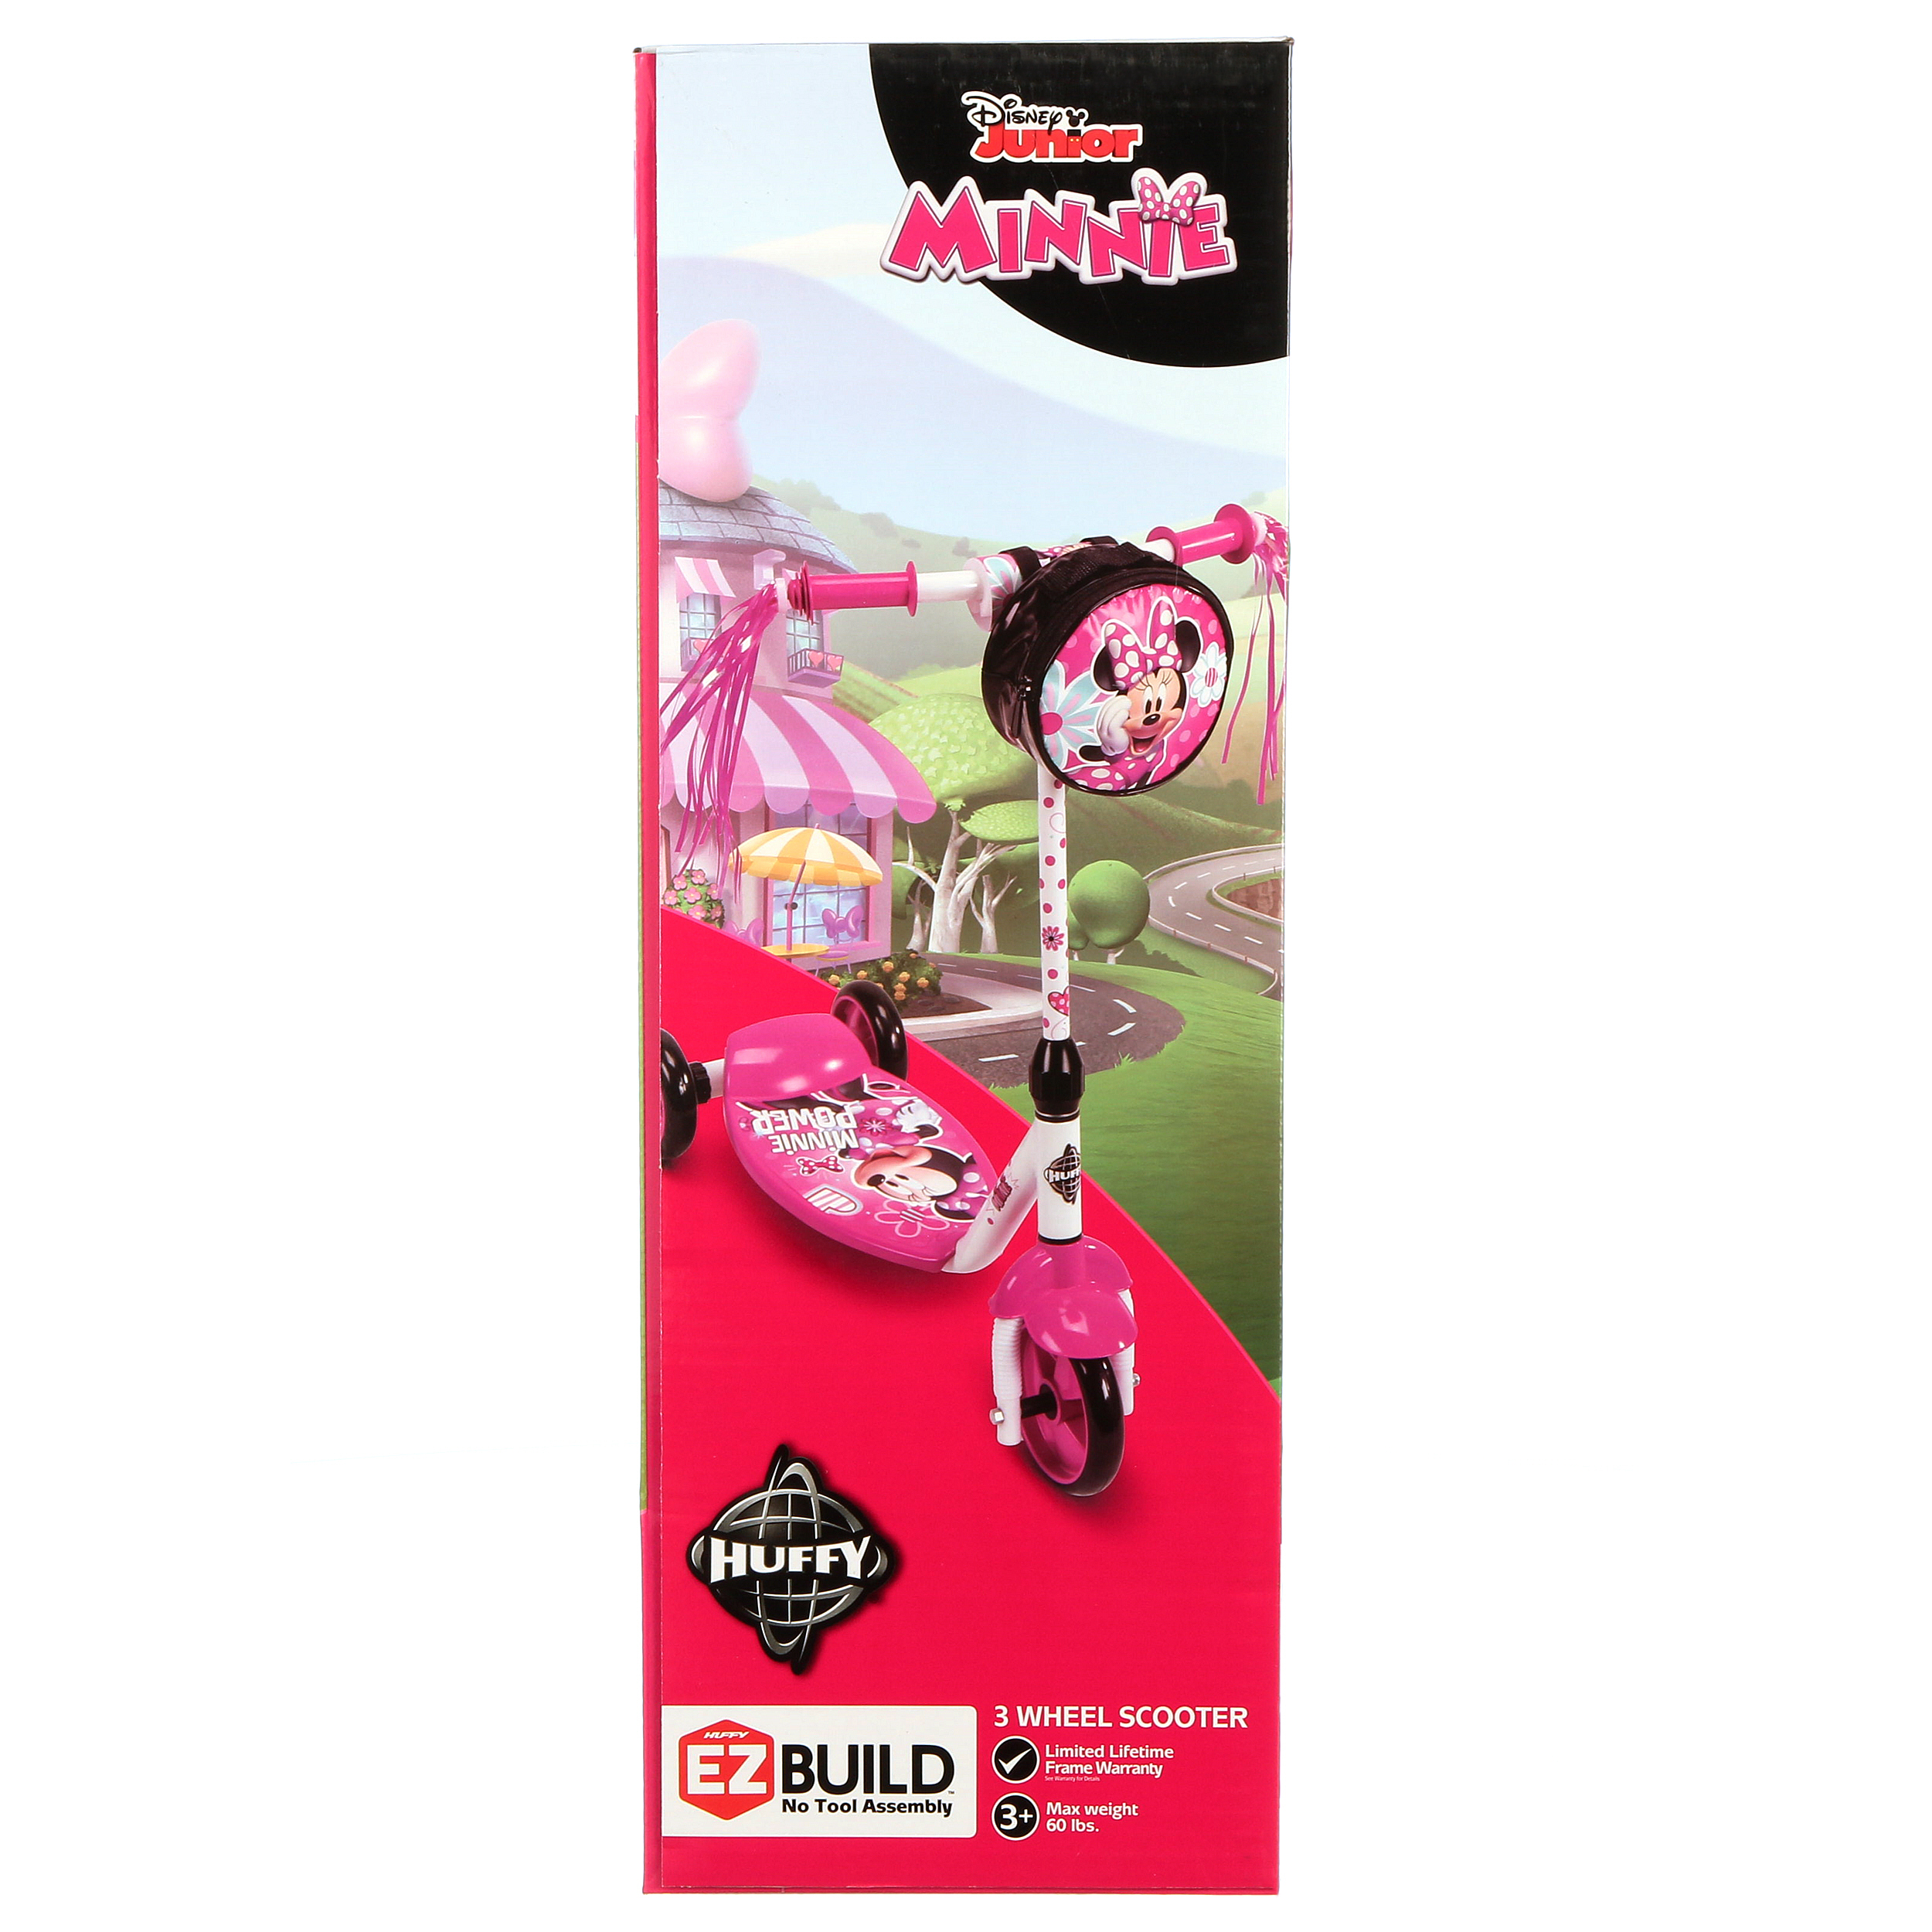 Disney Minnie 3 Wheel Preschool Scooter for Girls by Huffy - image 2 of 5